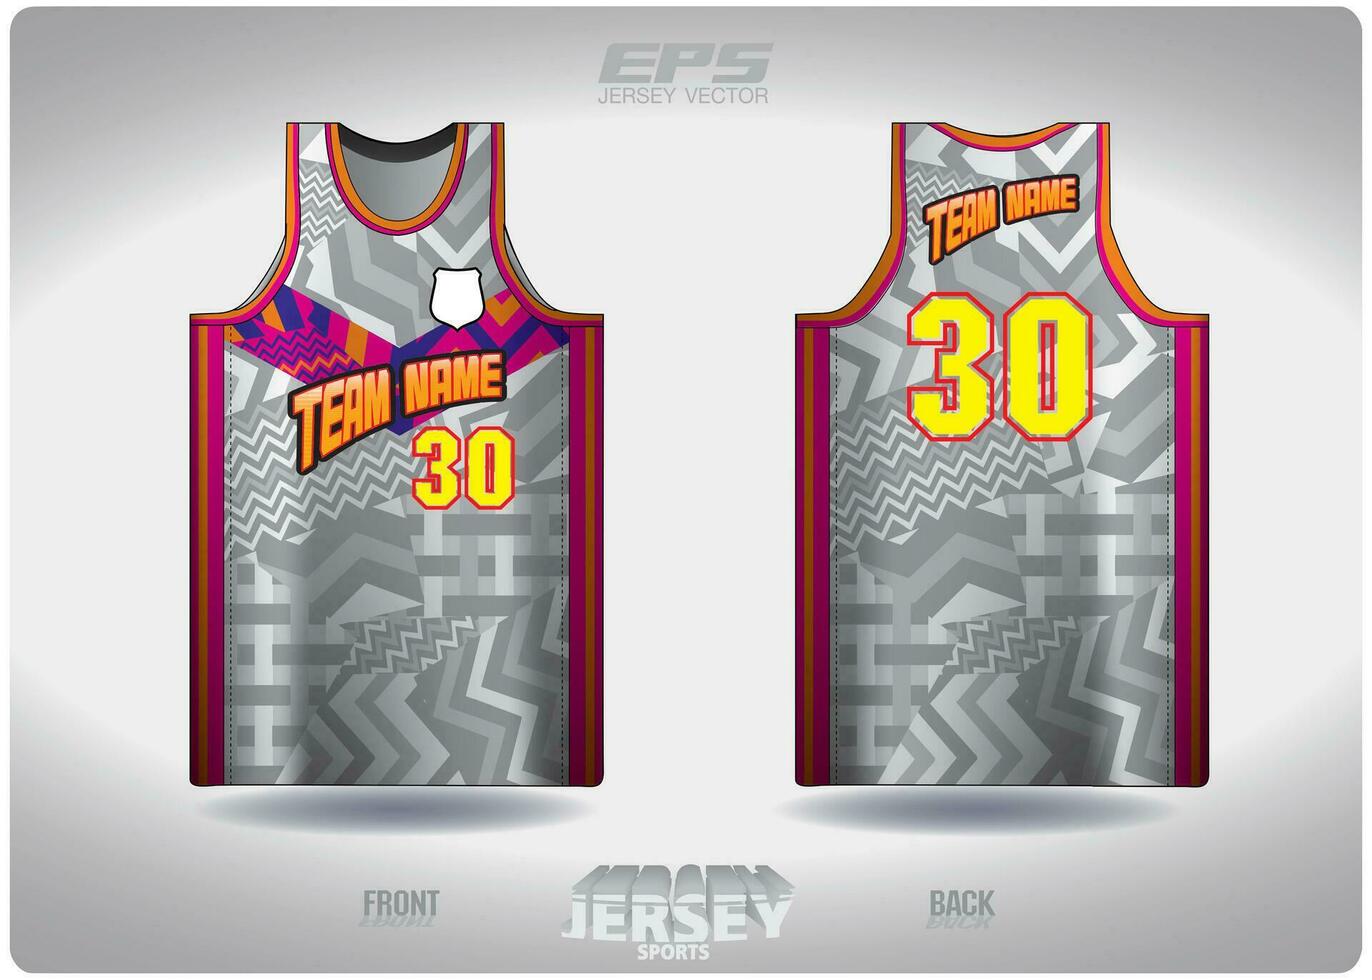 EPS jersey sports shirt vector.Black white zigzags colorful prints pattern design, illustration, textile background for basketball shirt sports t-shirt, basketball jersey shirt vector